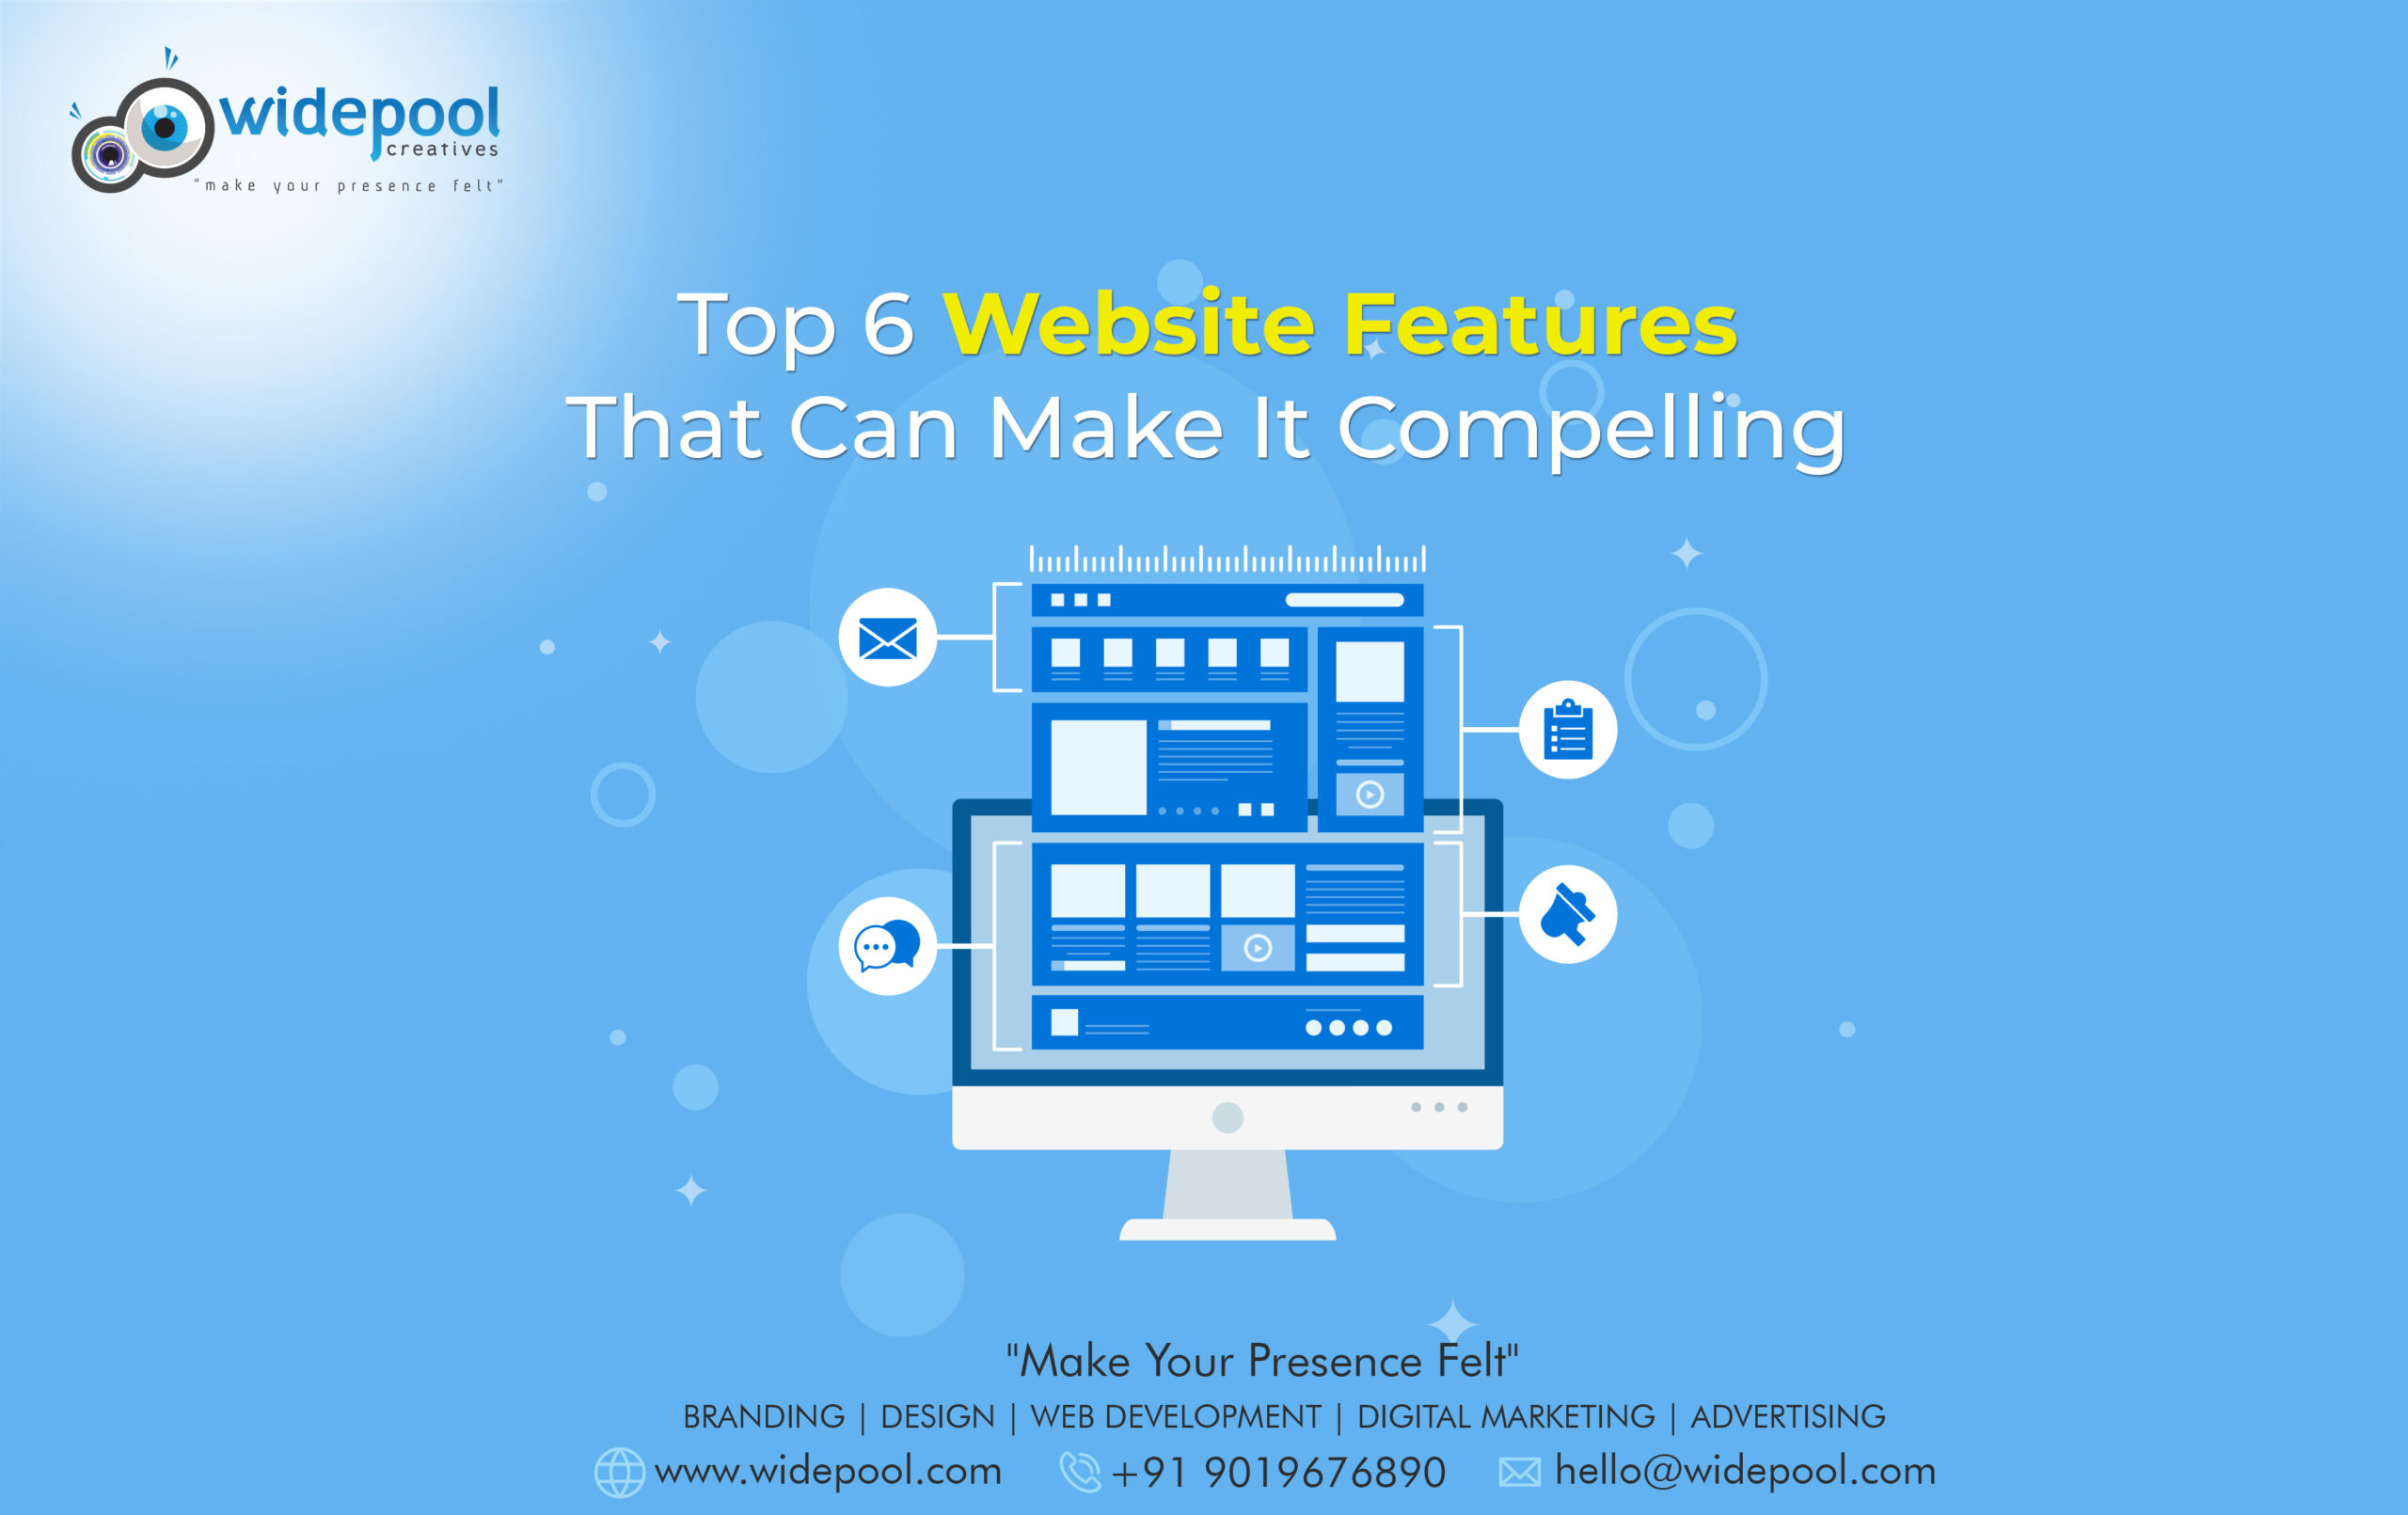 Top 6 Website Features That Can Make It Compelling